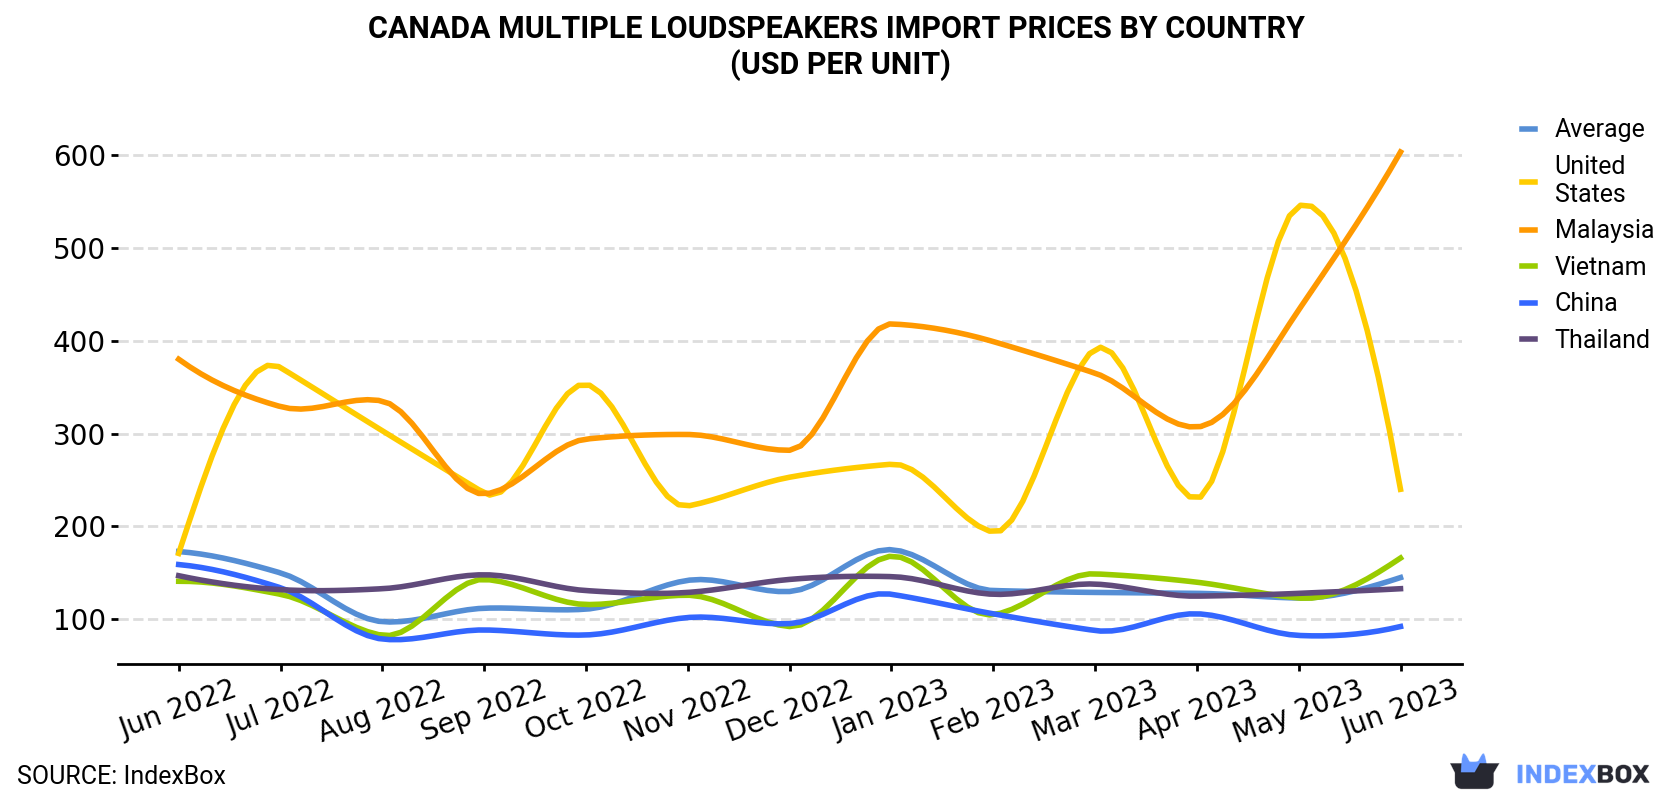 Canada Multiple Loudspeakers Import Prices By Country (USD Per Unit)